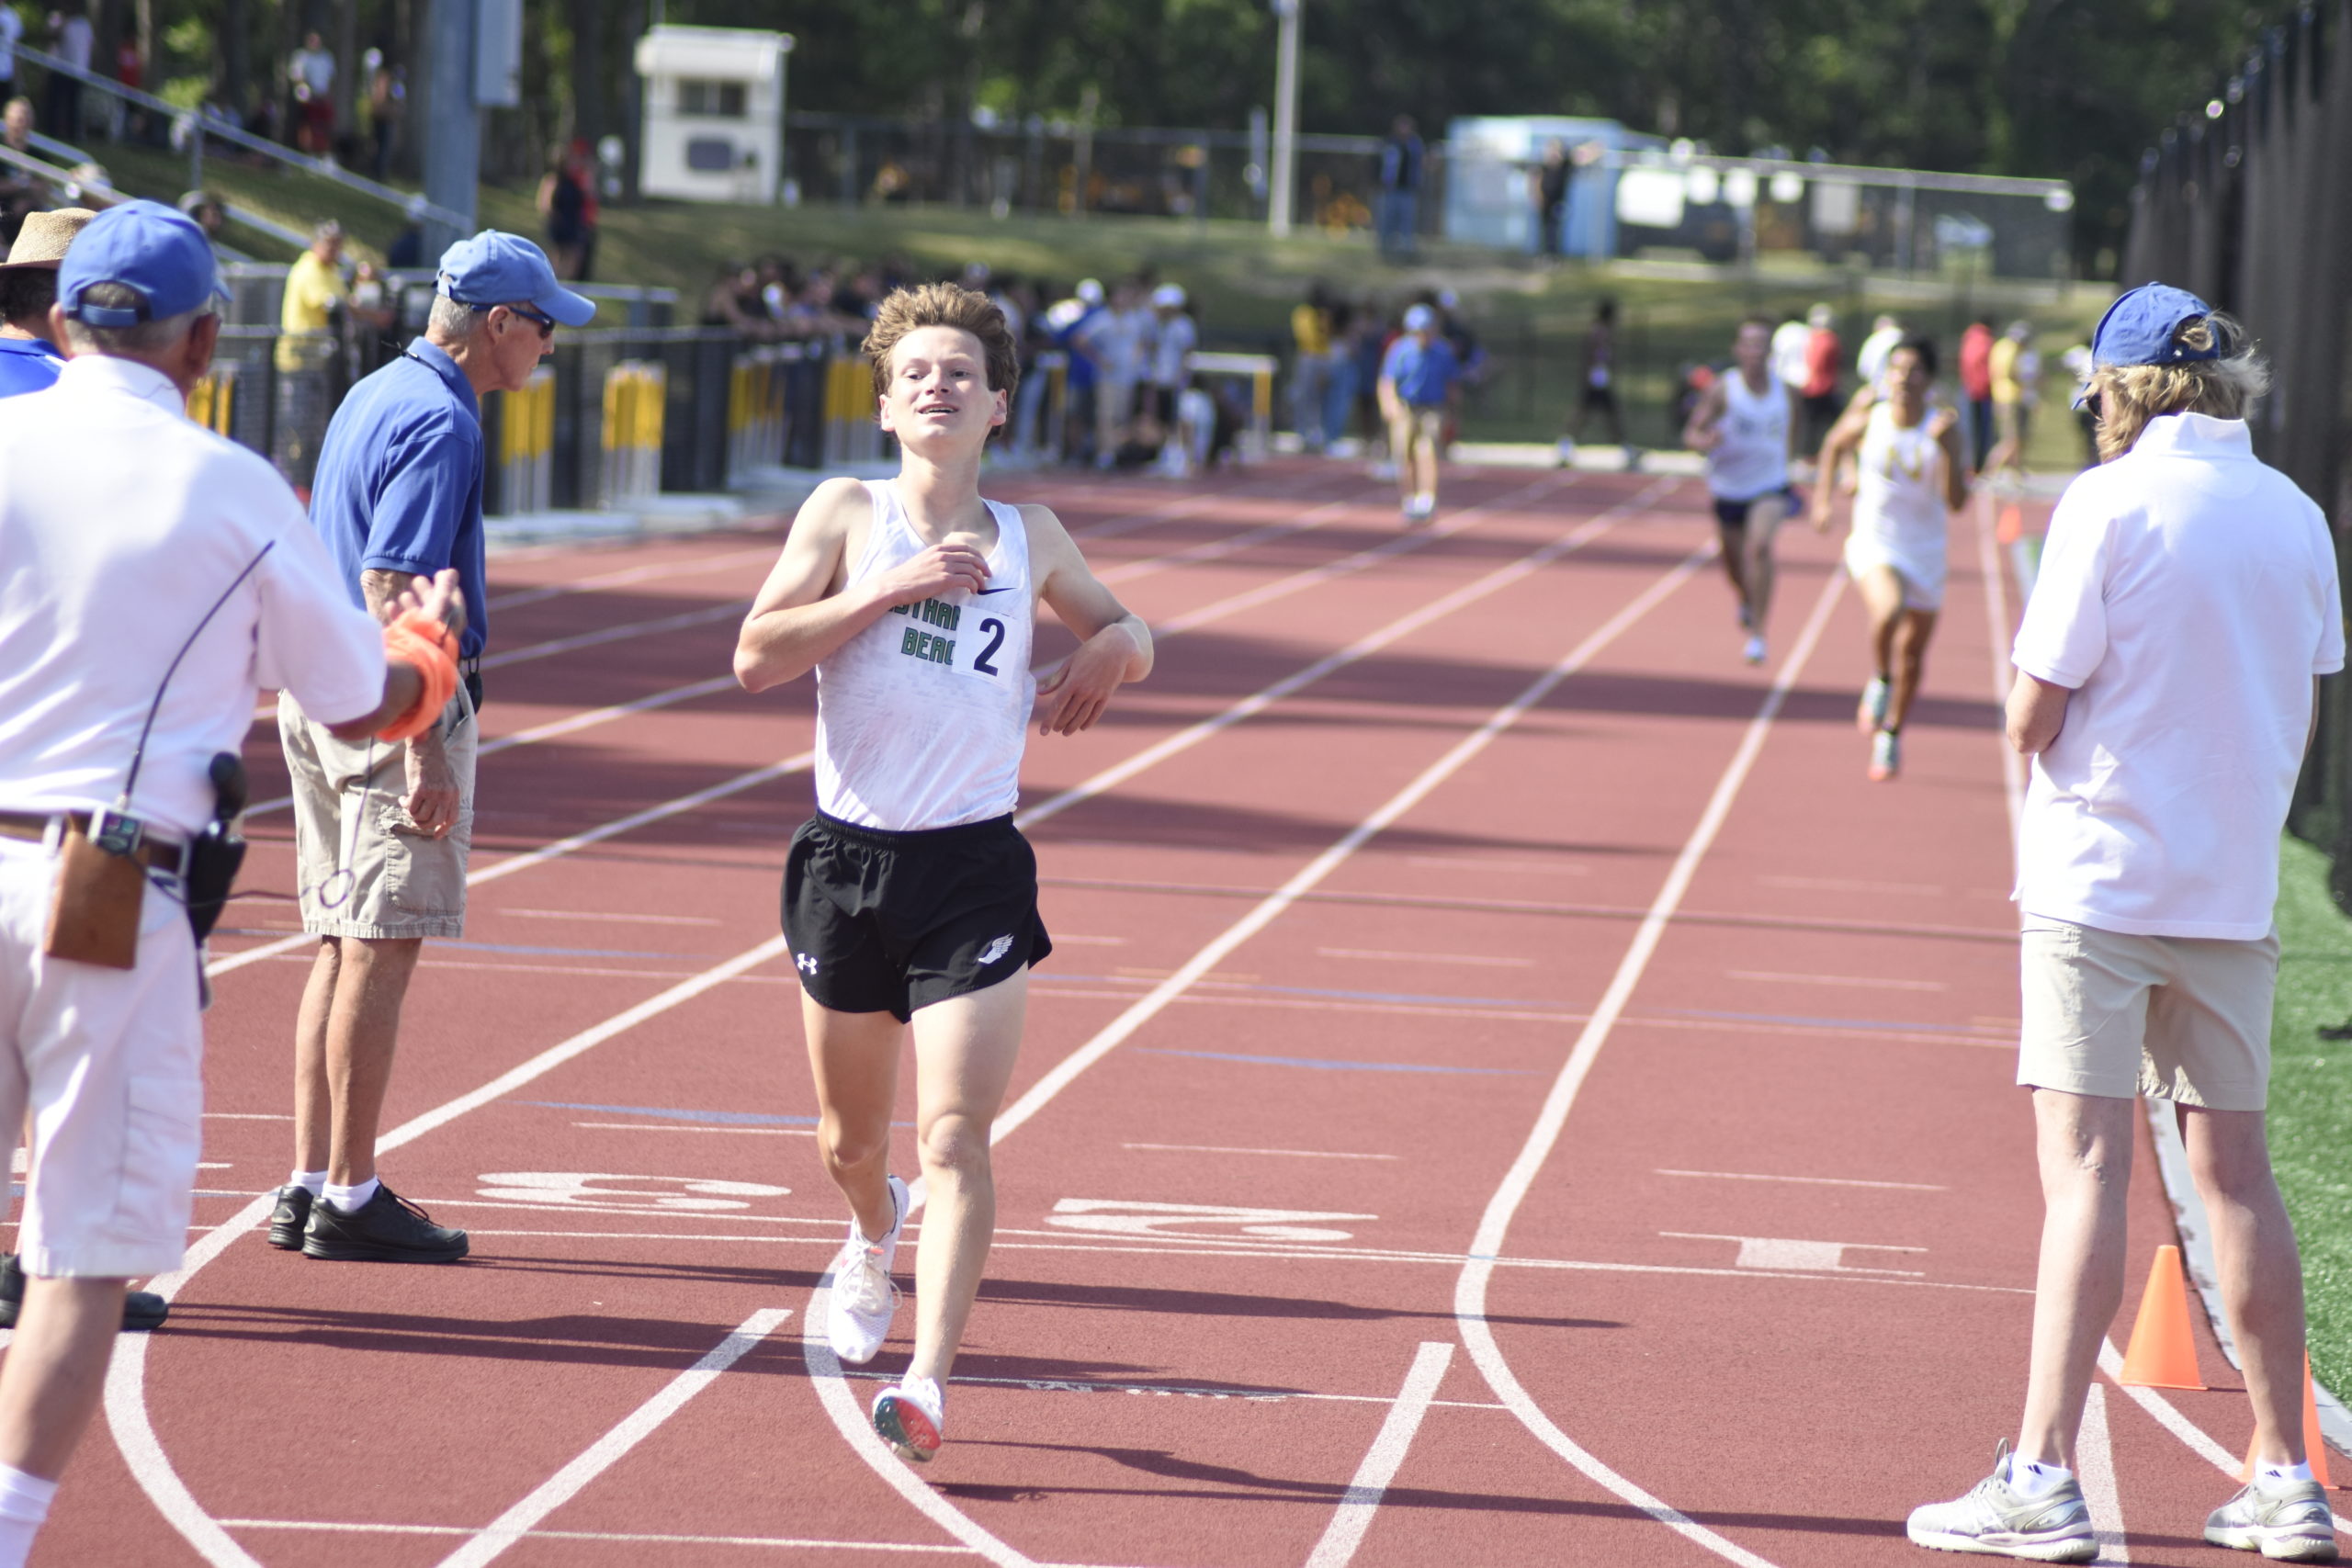 Westhampton Beach sophomore Maximus Haynia was county champion in the 3,200-meter race.